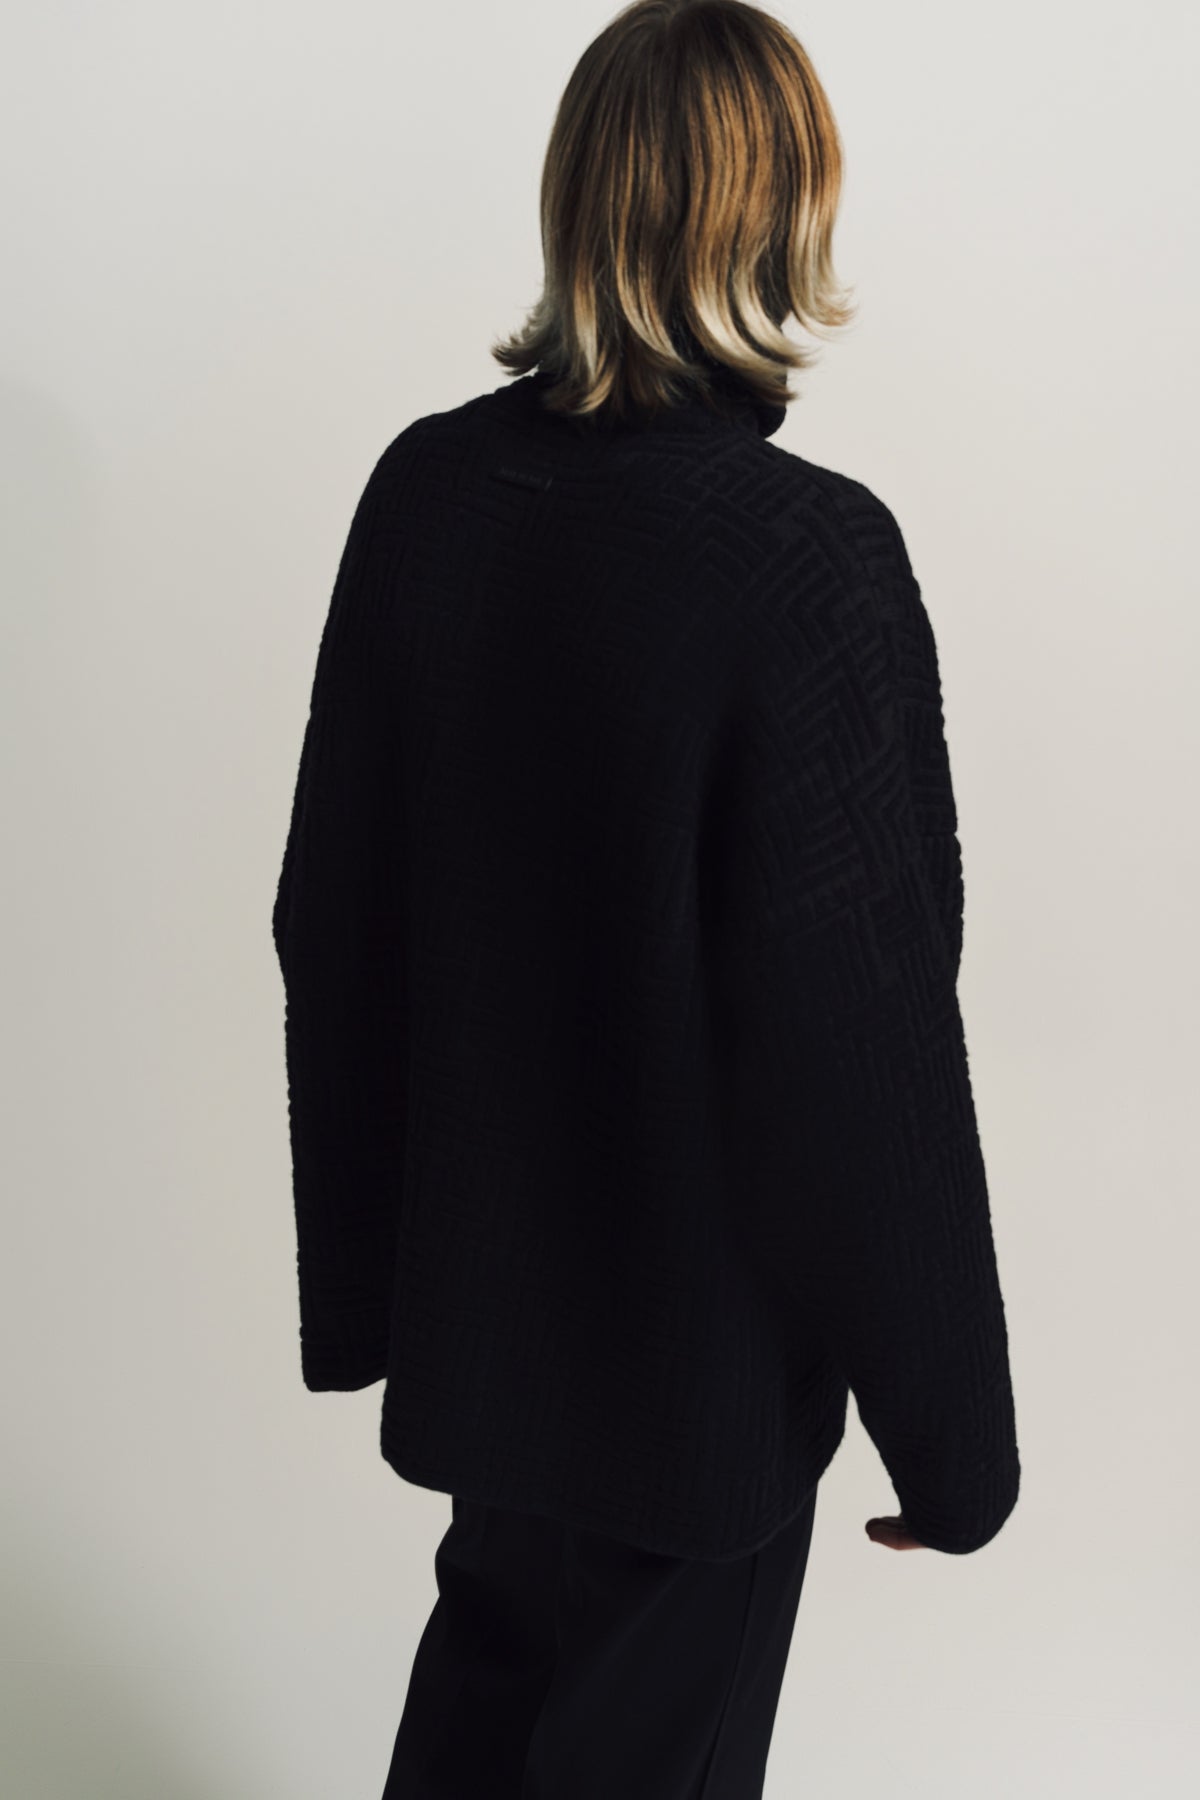 FEAR OF GOD | WOOL JACQUARD HIGH NECK SWEATER